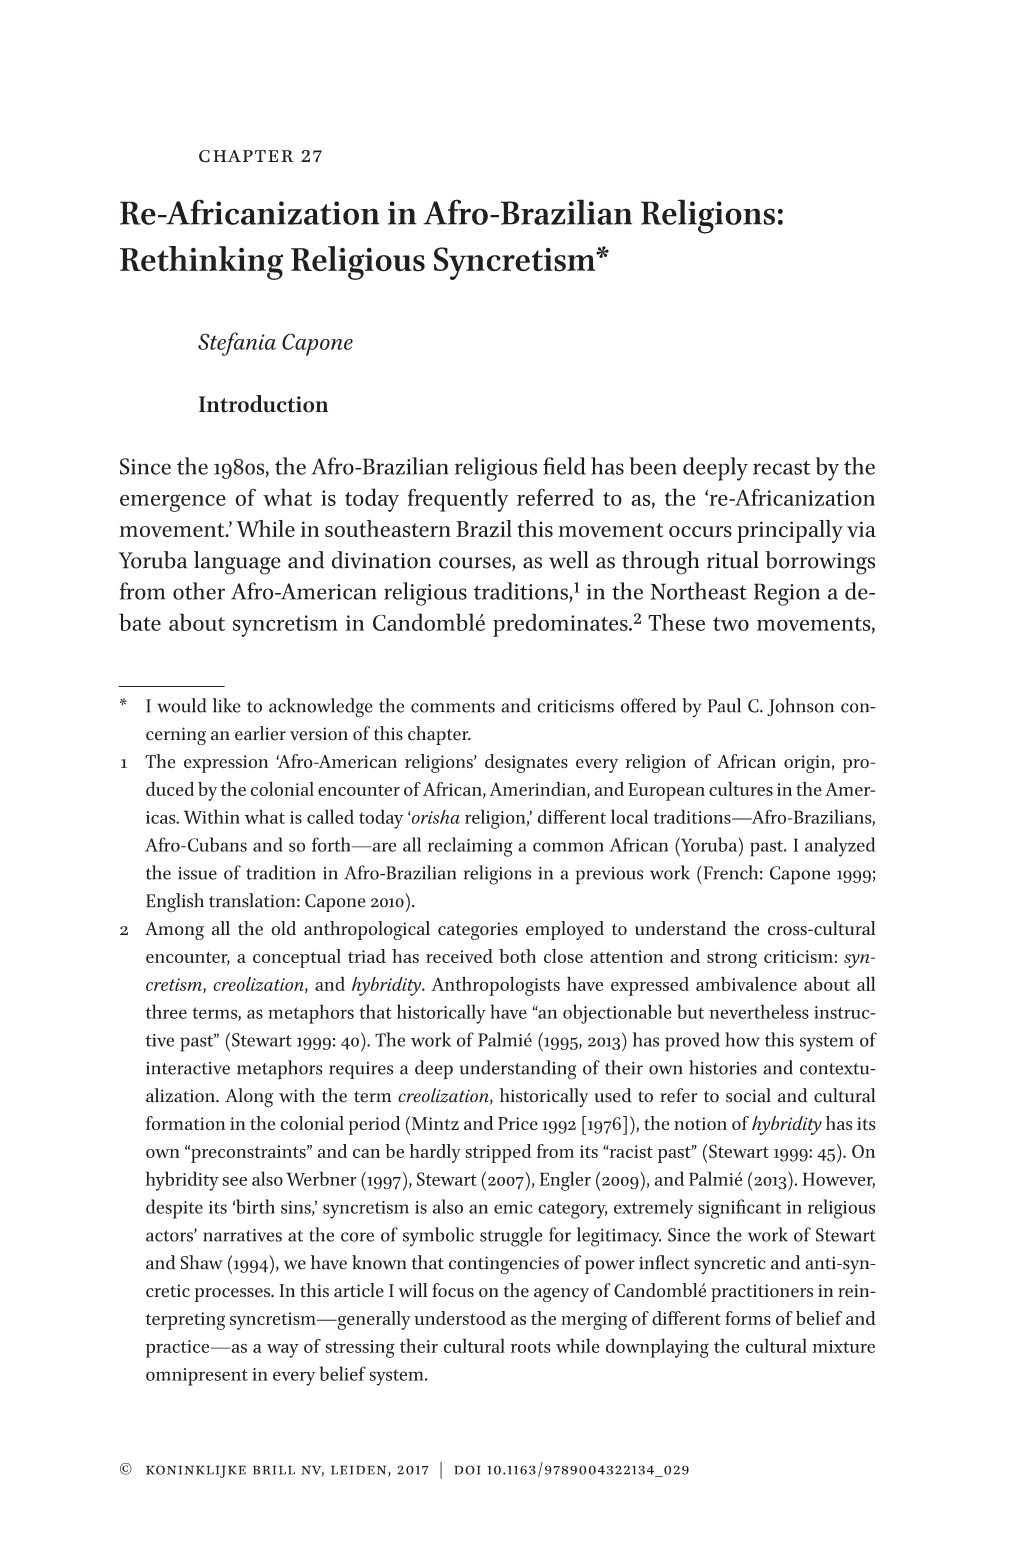 Re-Africanization in Afro-Brazilian Religions: Rethinking Religious Syncretism*